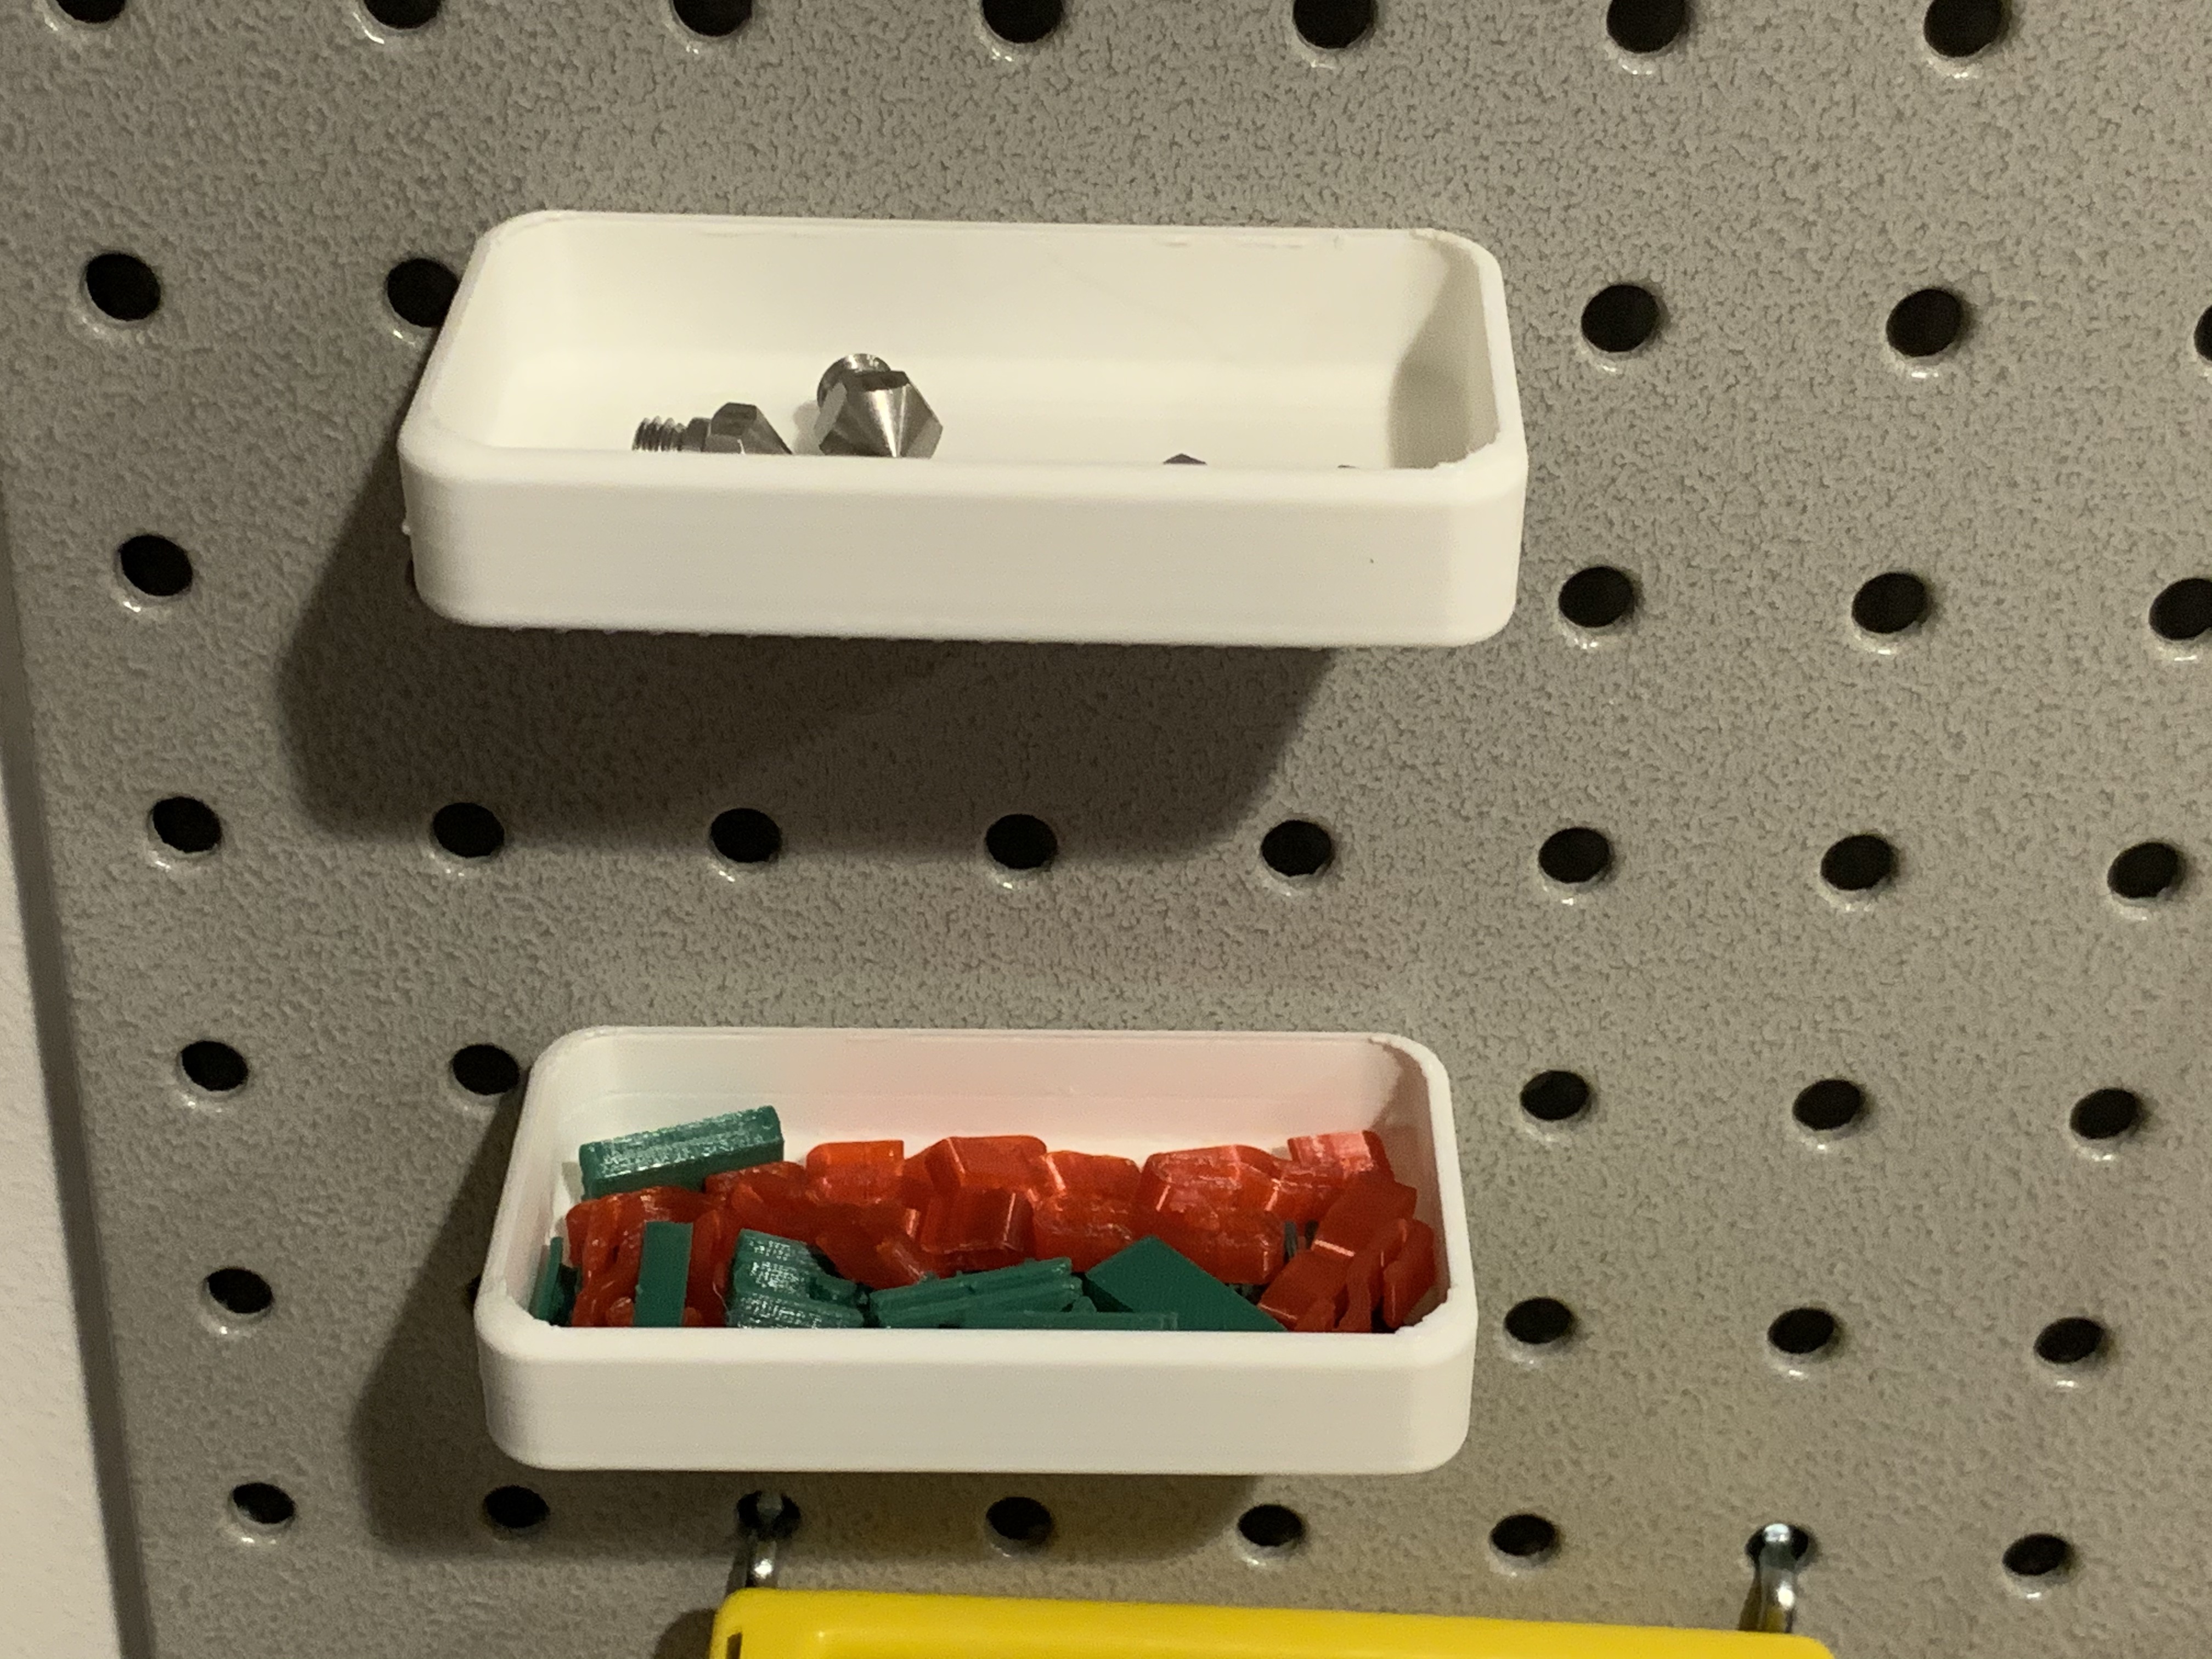 Pegboard holder for filament clips, print nozzles, and other small items